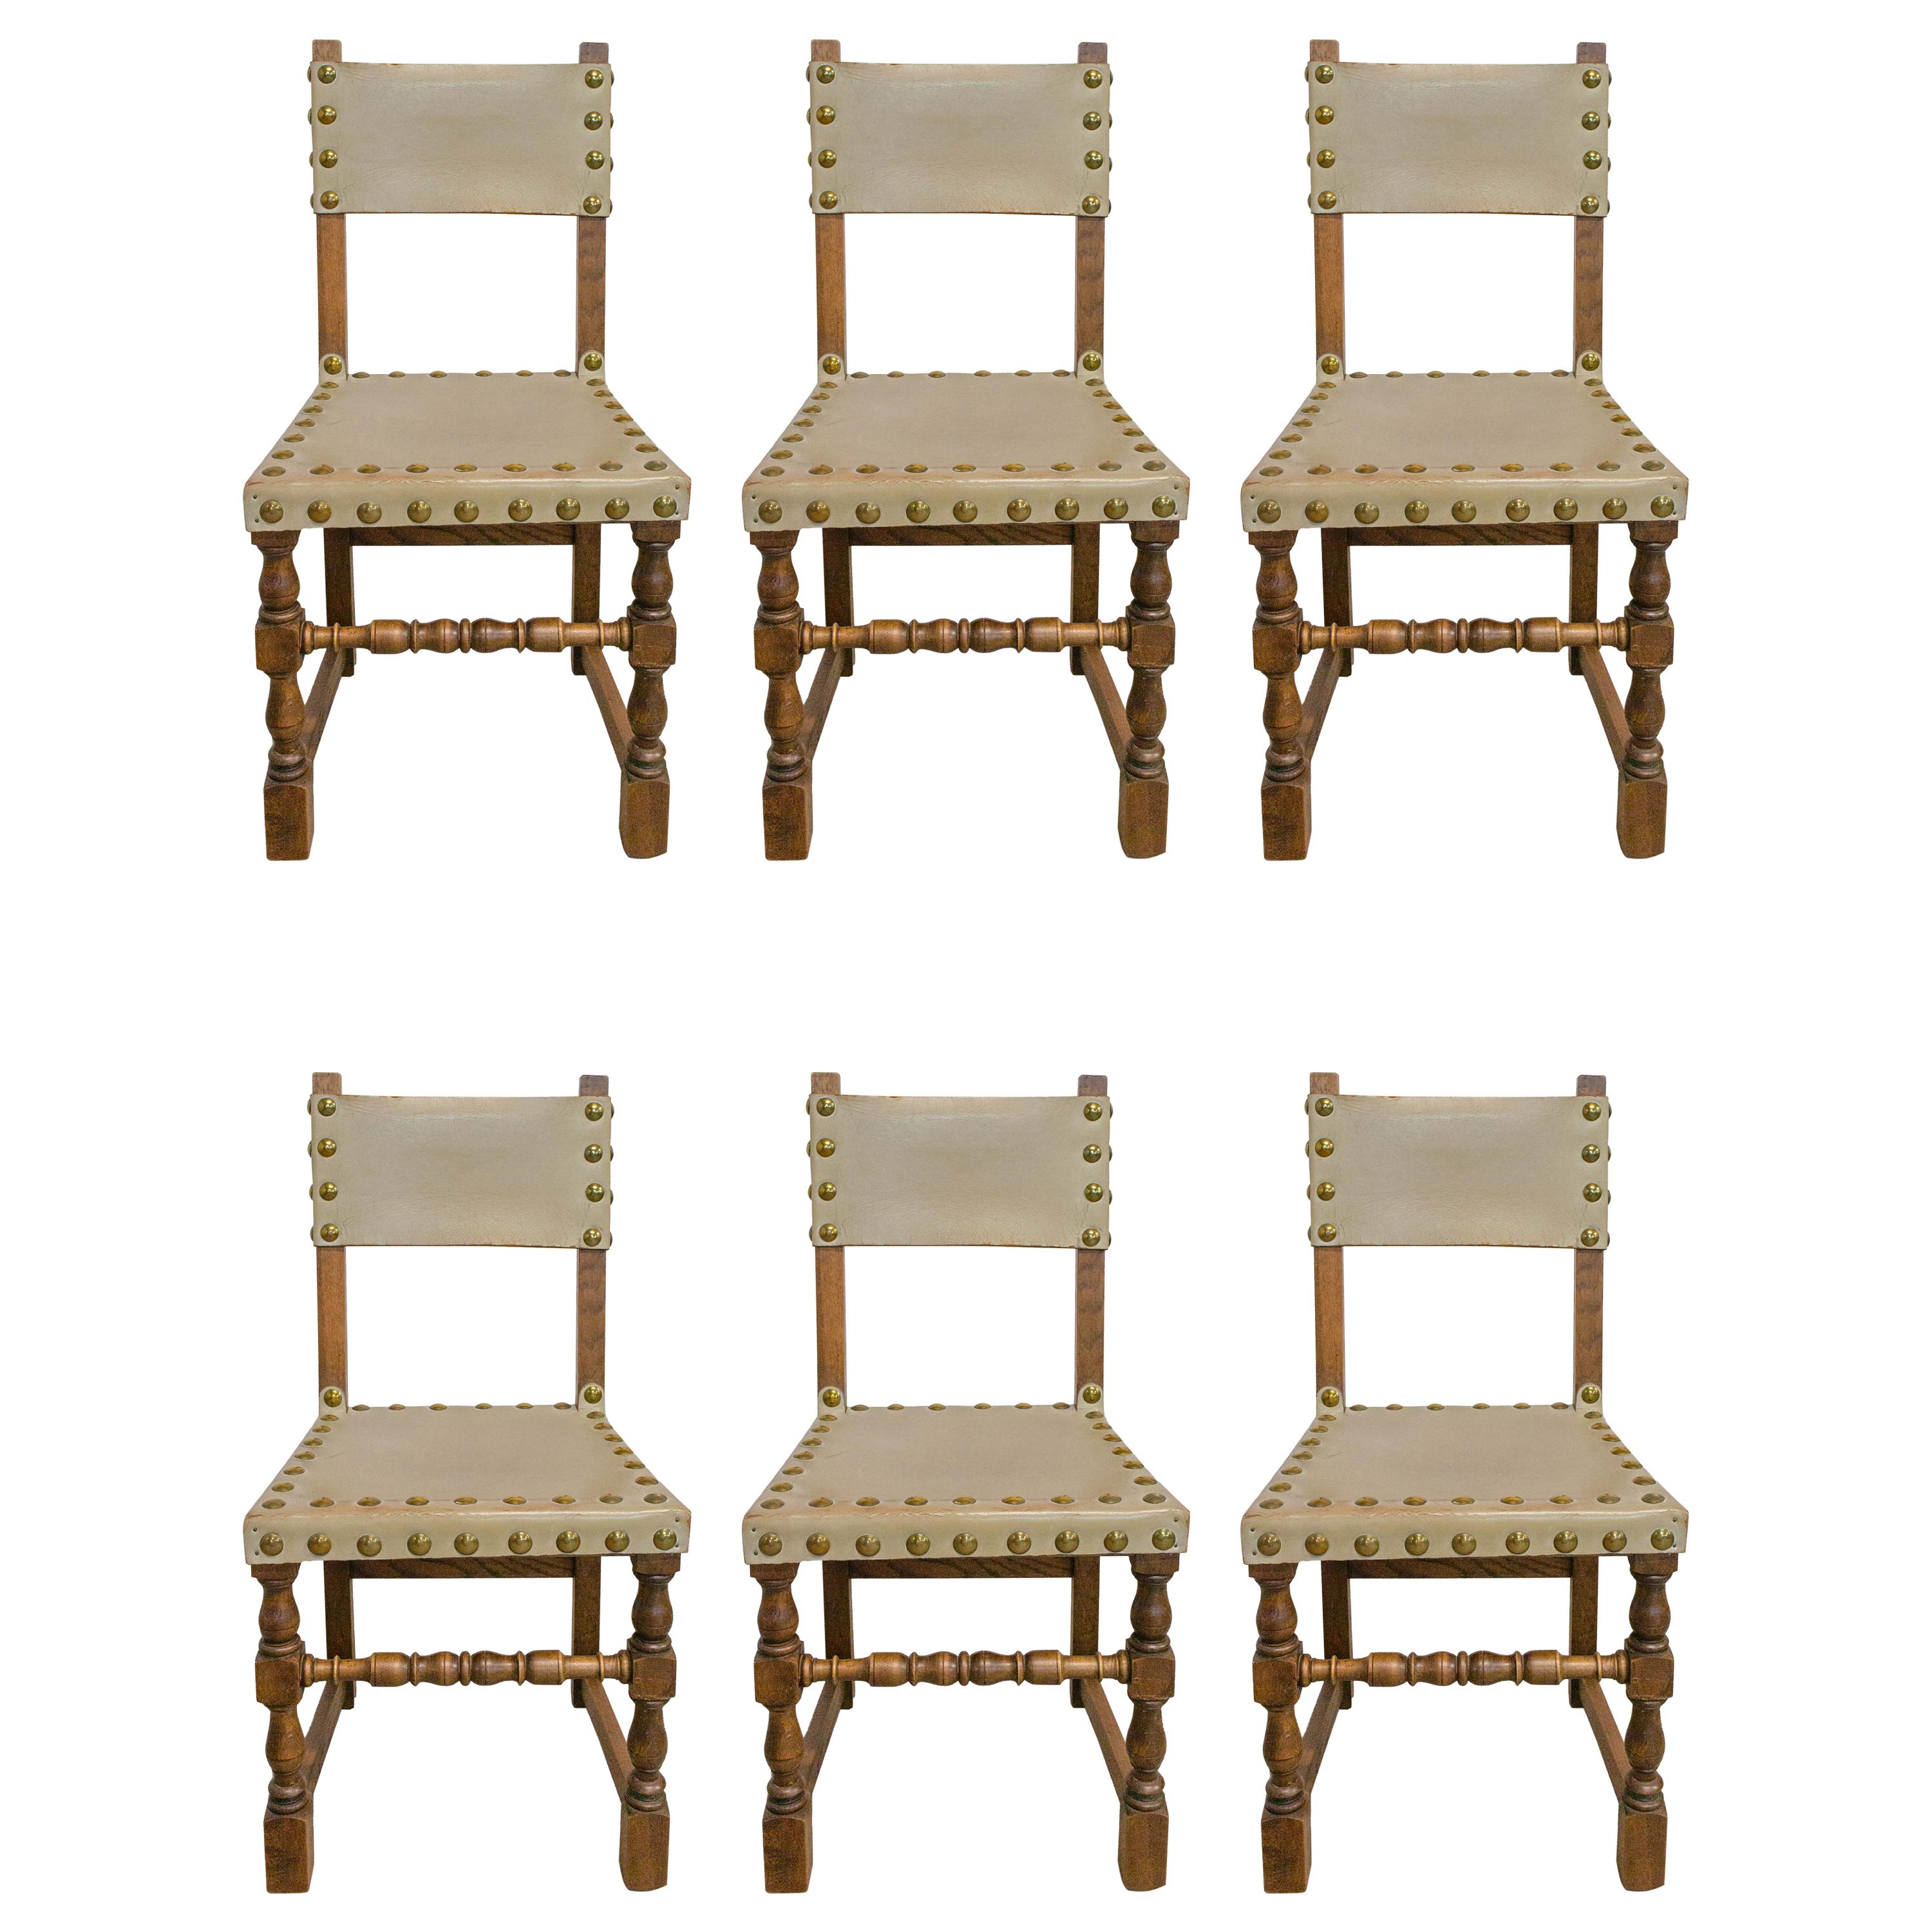 Six dining chairs vintage 20th century Spanish leather brass studs oak